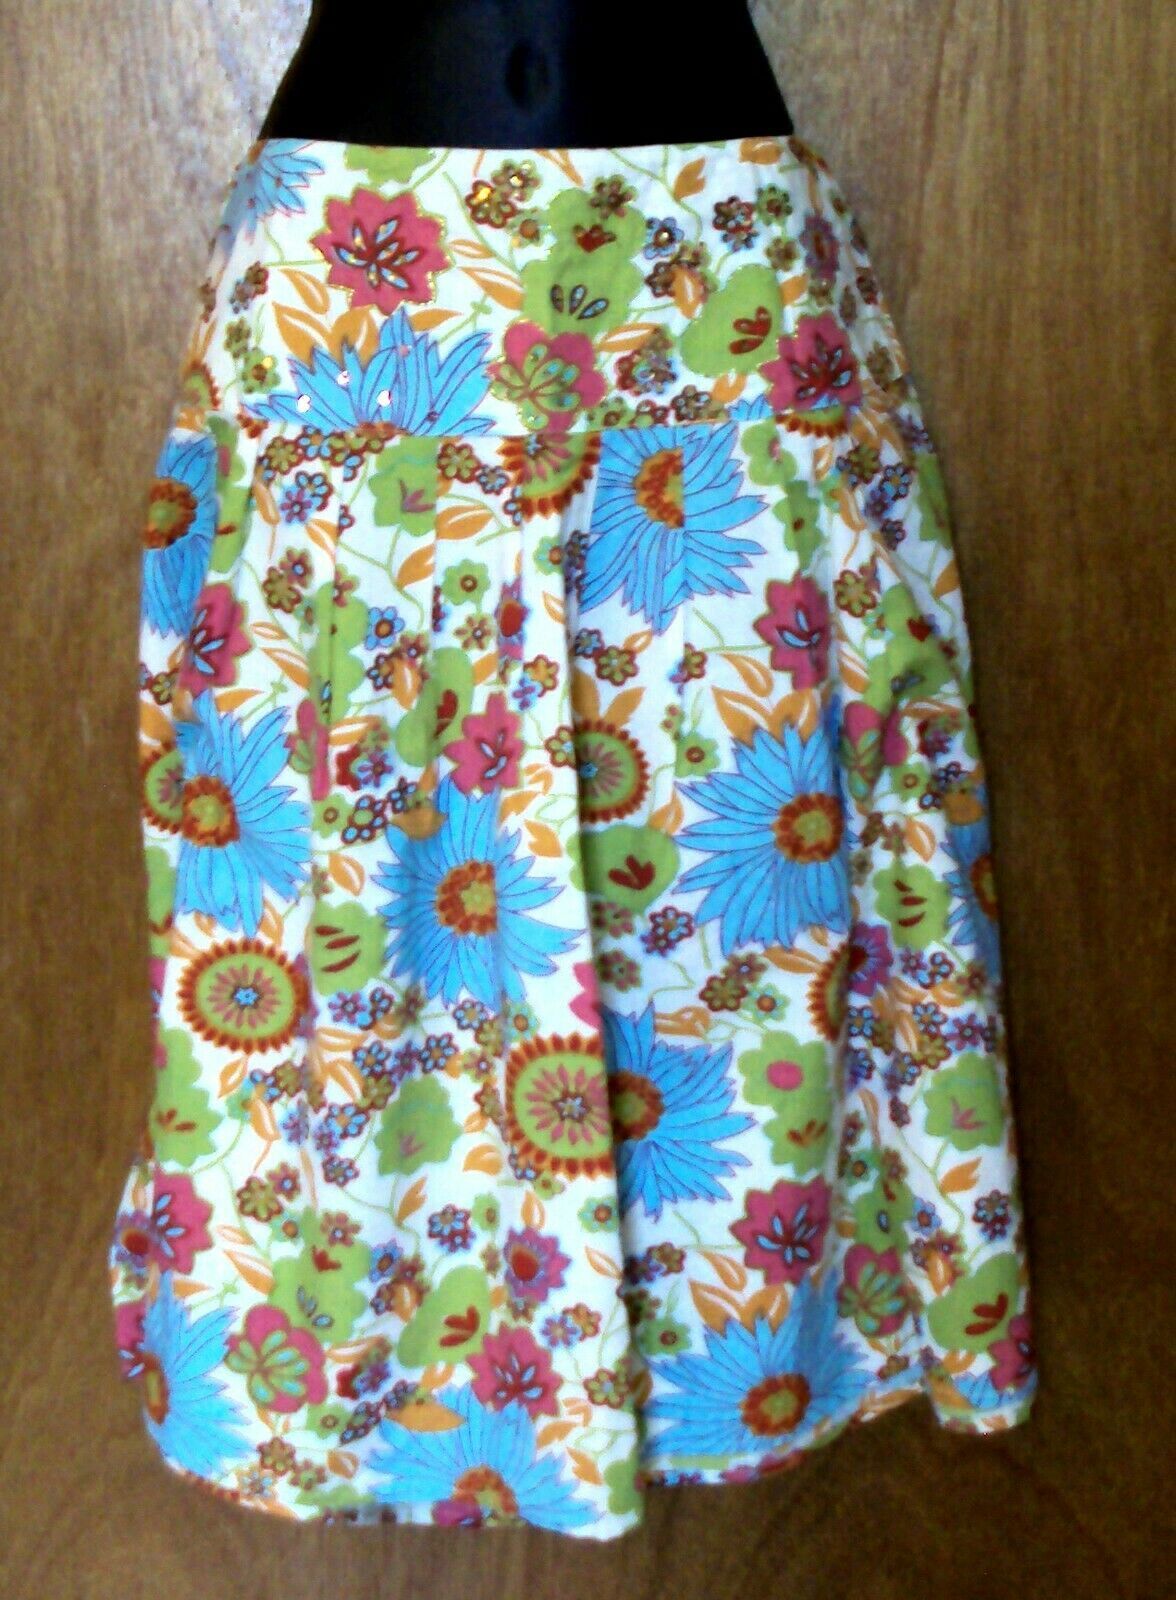 Primary image for Touche Floral Print Skirt size 10 Pleated Drop Waist Sequin Embellished Yoke 